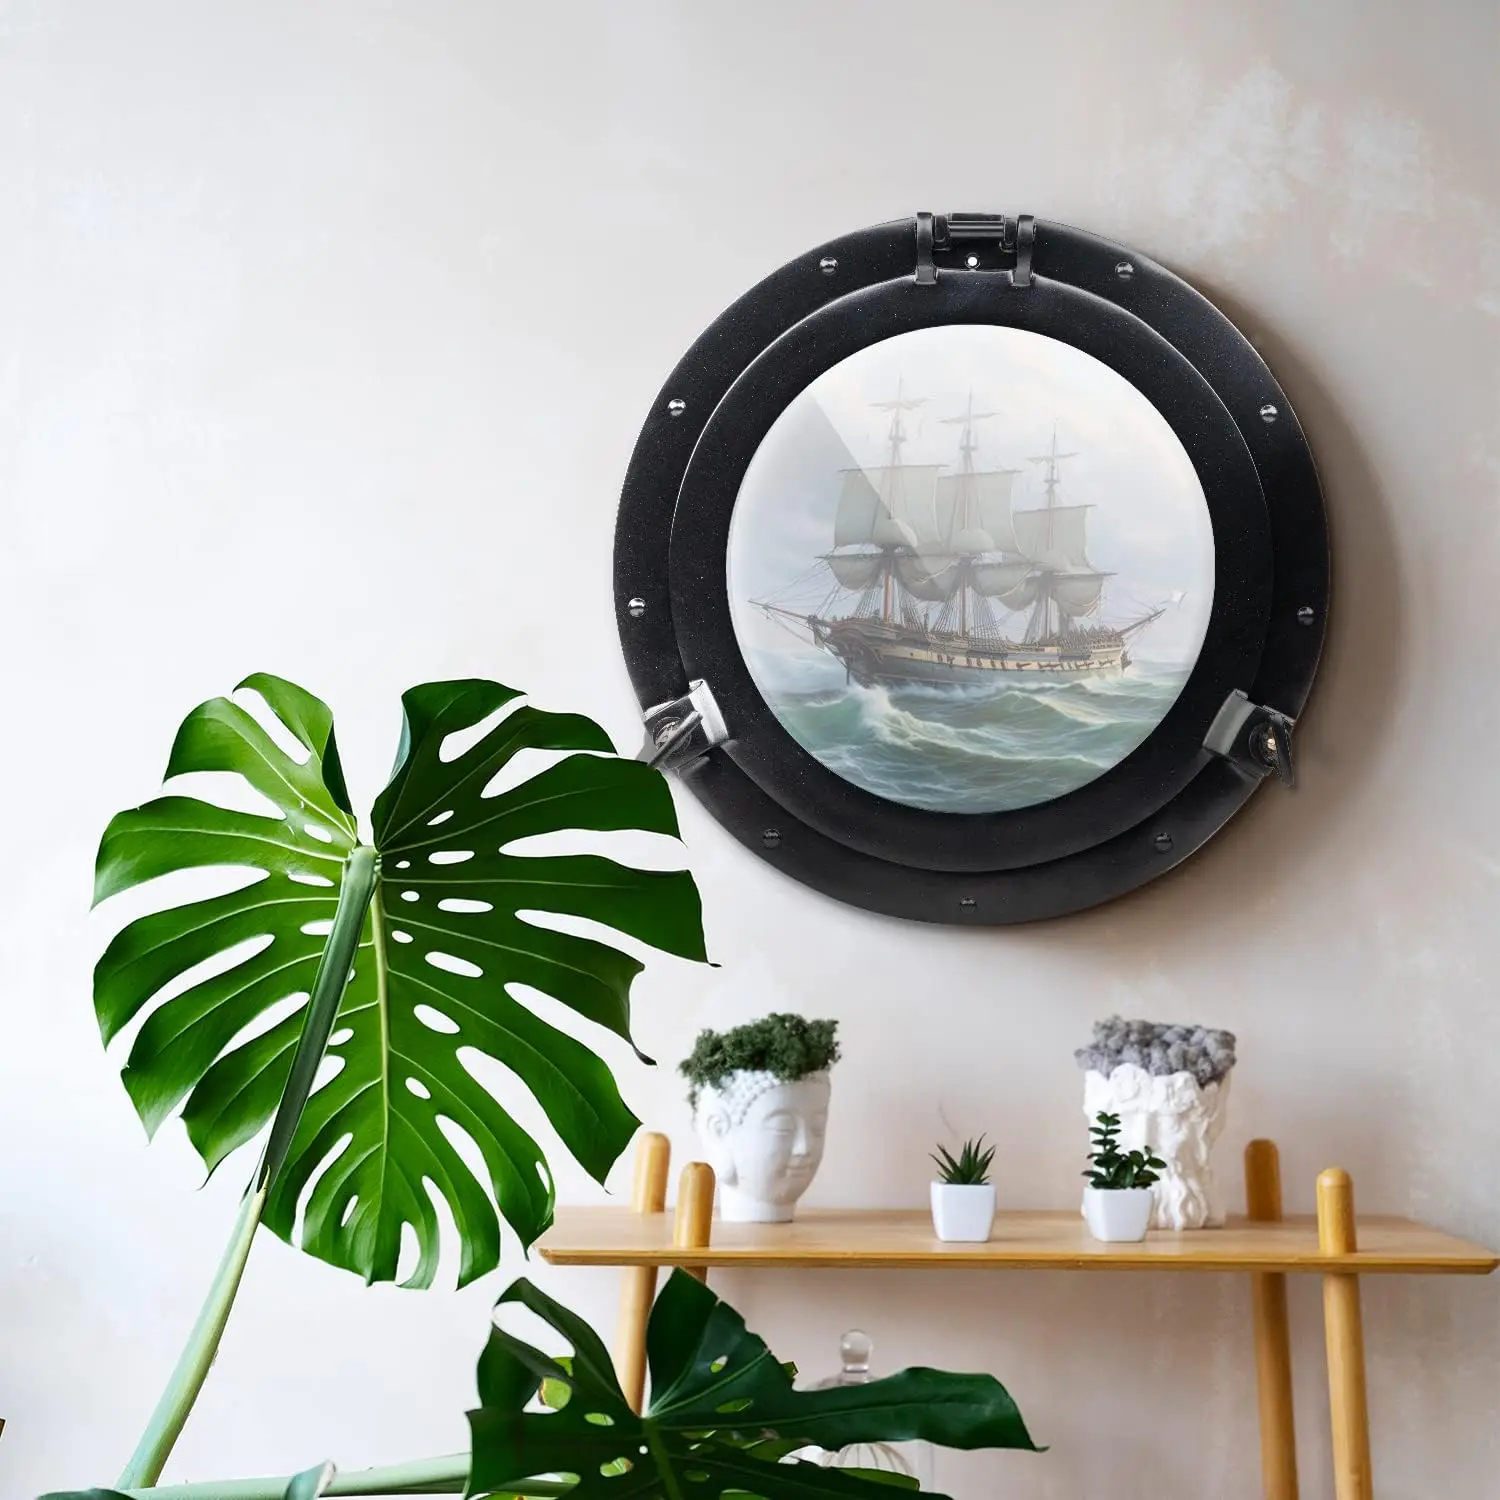 

12" Antique Wall Mounted Premium and Ship's Glassed Porthole|Bathroom Window Mirror|Pirate's Maritime Nautical Themed Decor